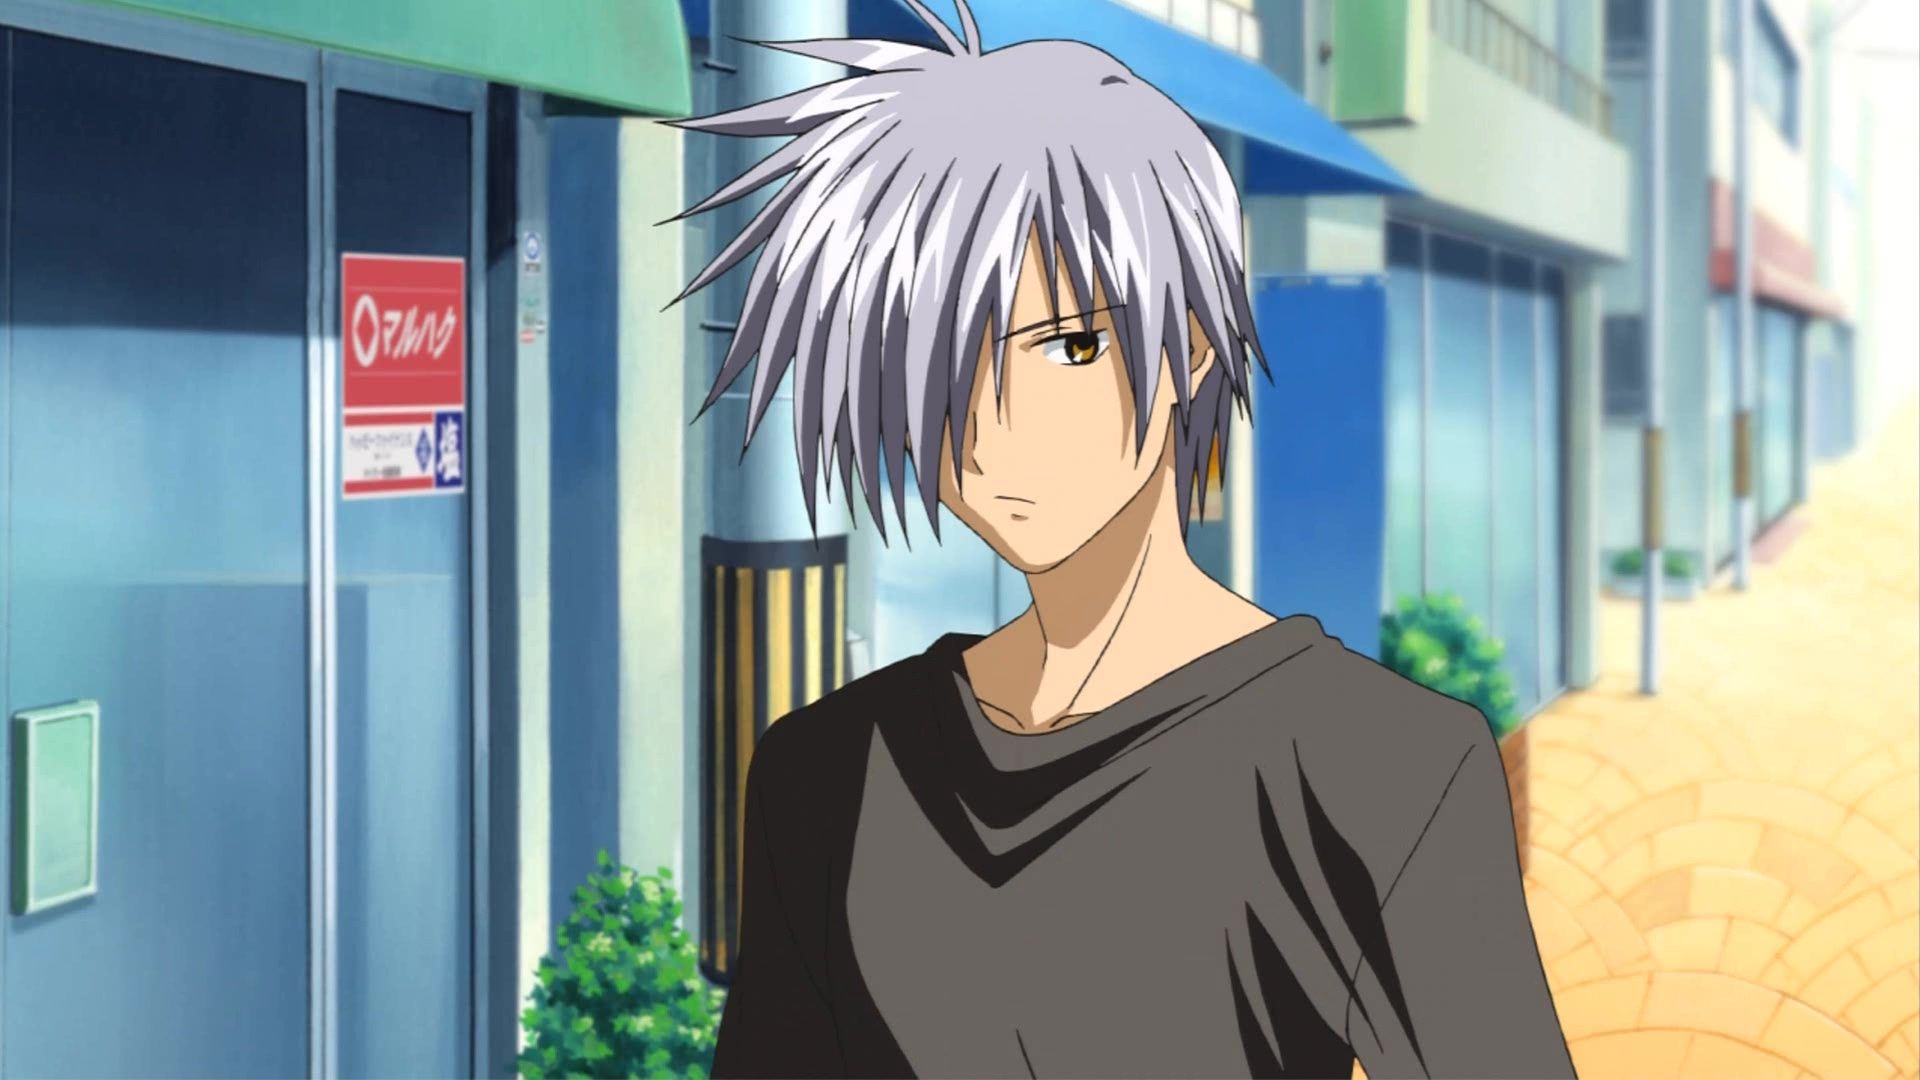 anime guy with silver hair and blue eyes